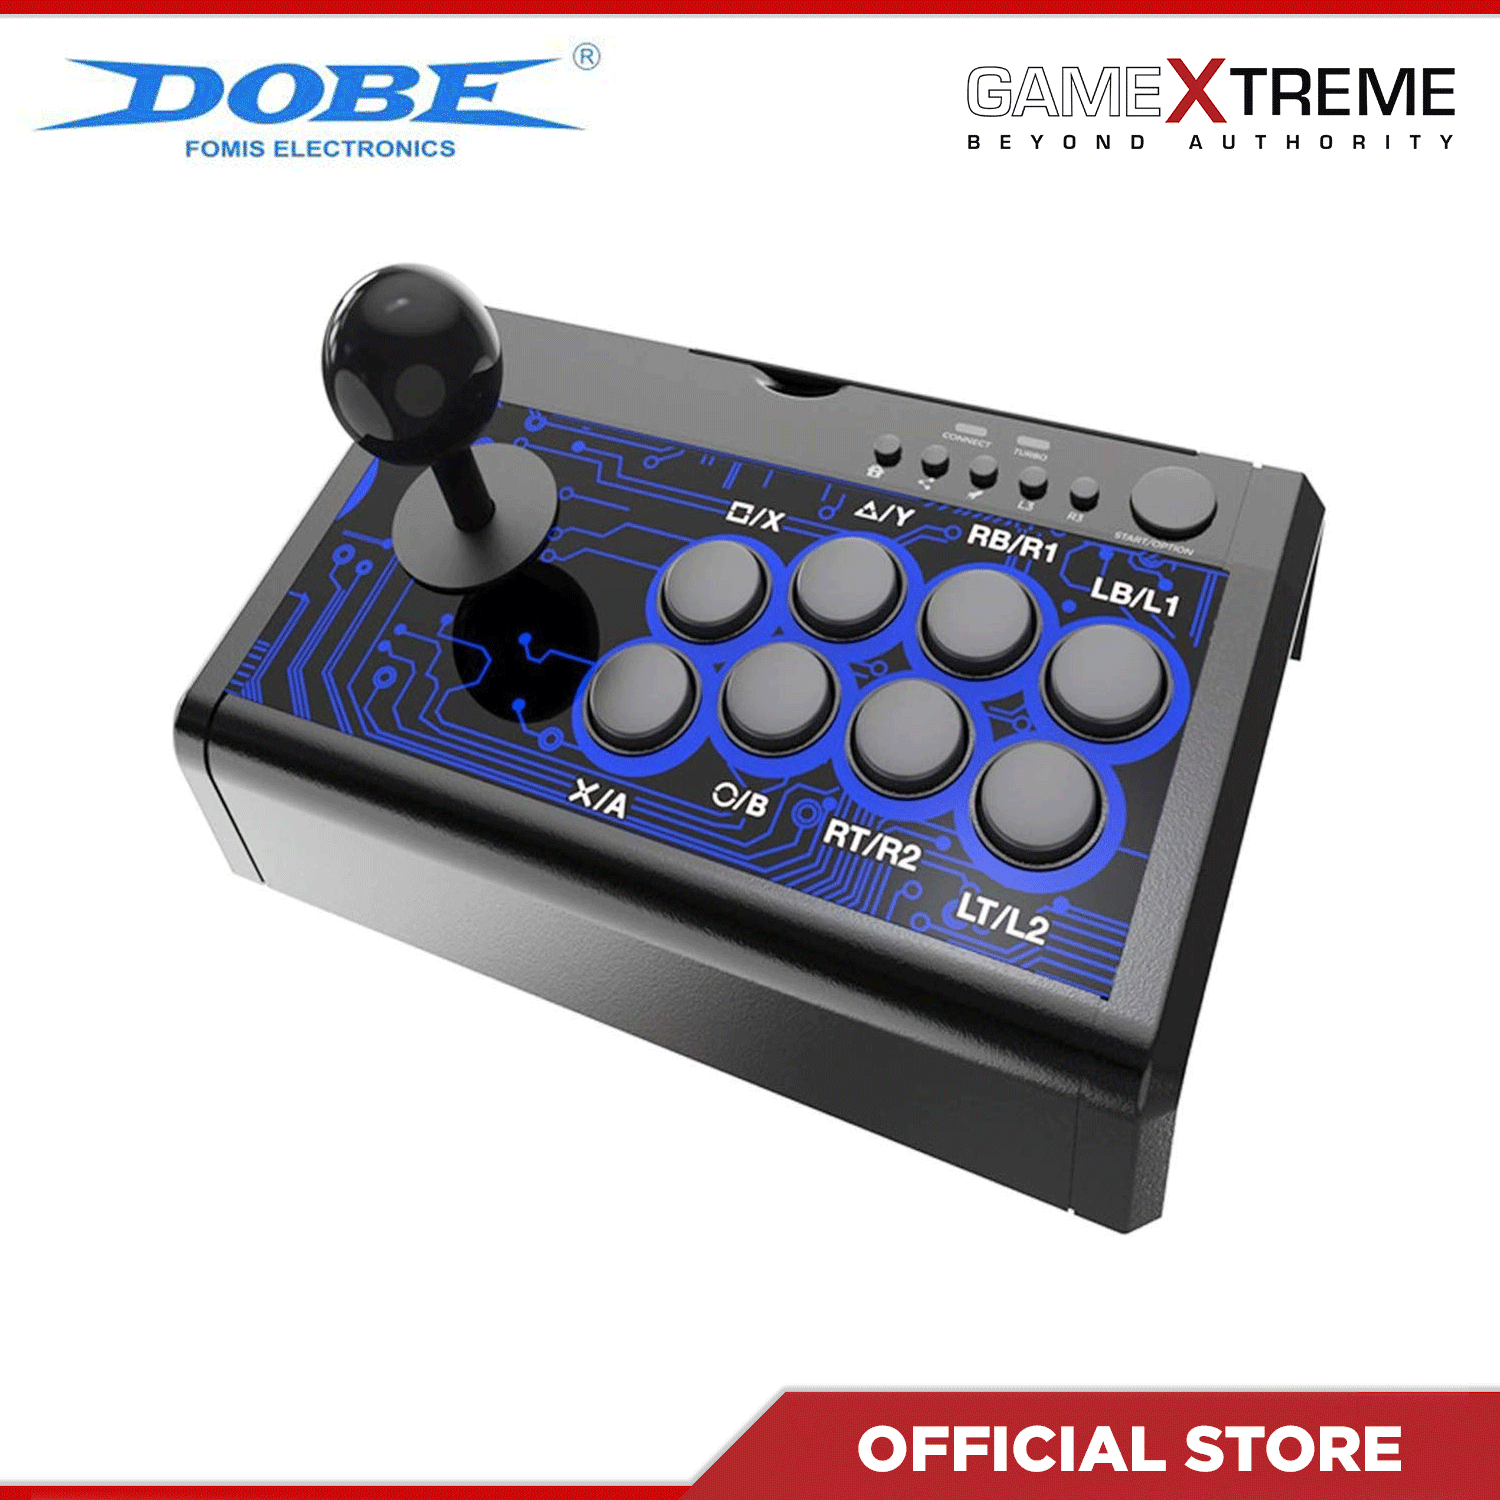 Møde miles middag Dobe PS4 7 in 1 Arcade Fighting Stick For PS4/PS3/SWITCH/XBOX/PC (TP4-1886)  | Lazada PH